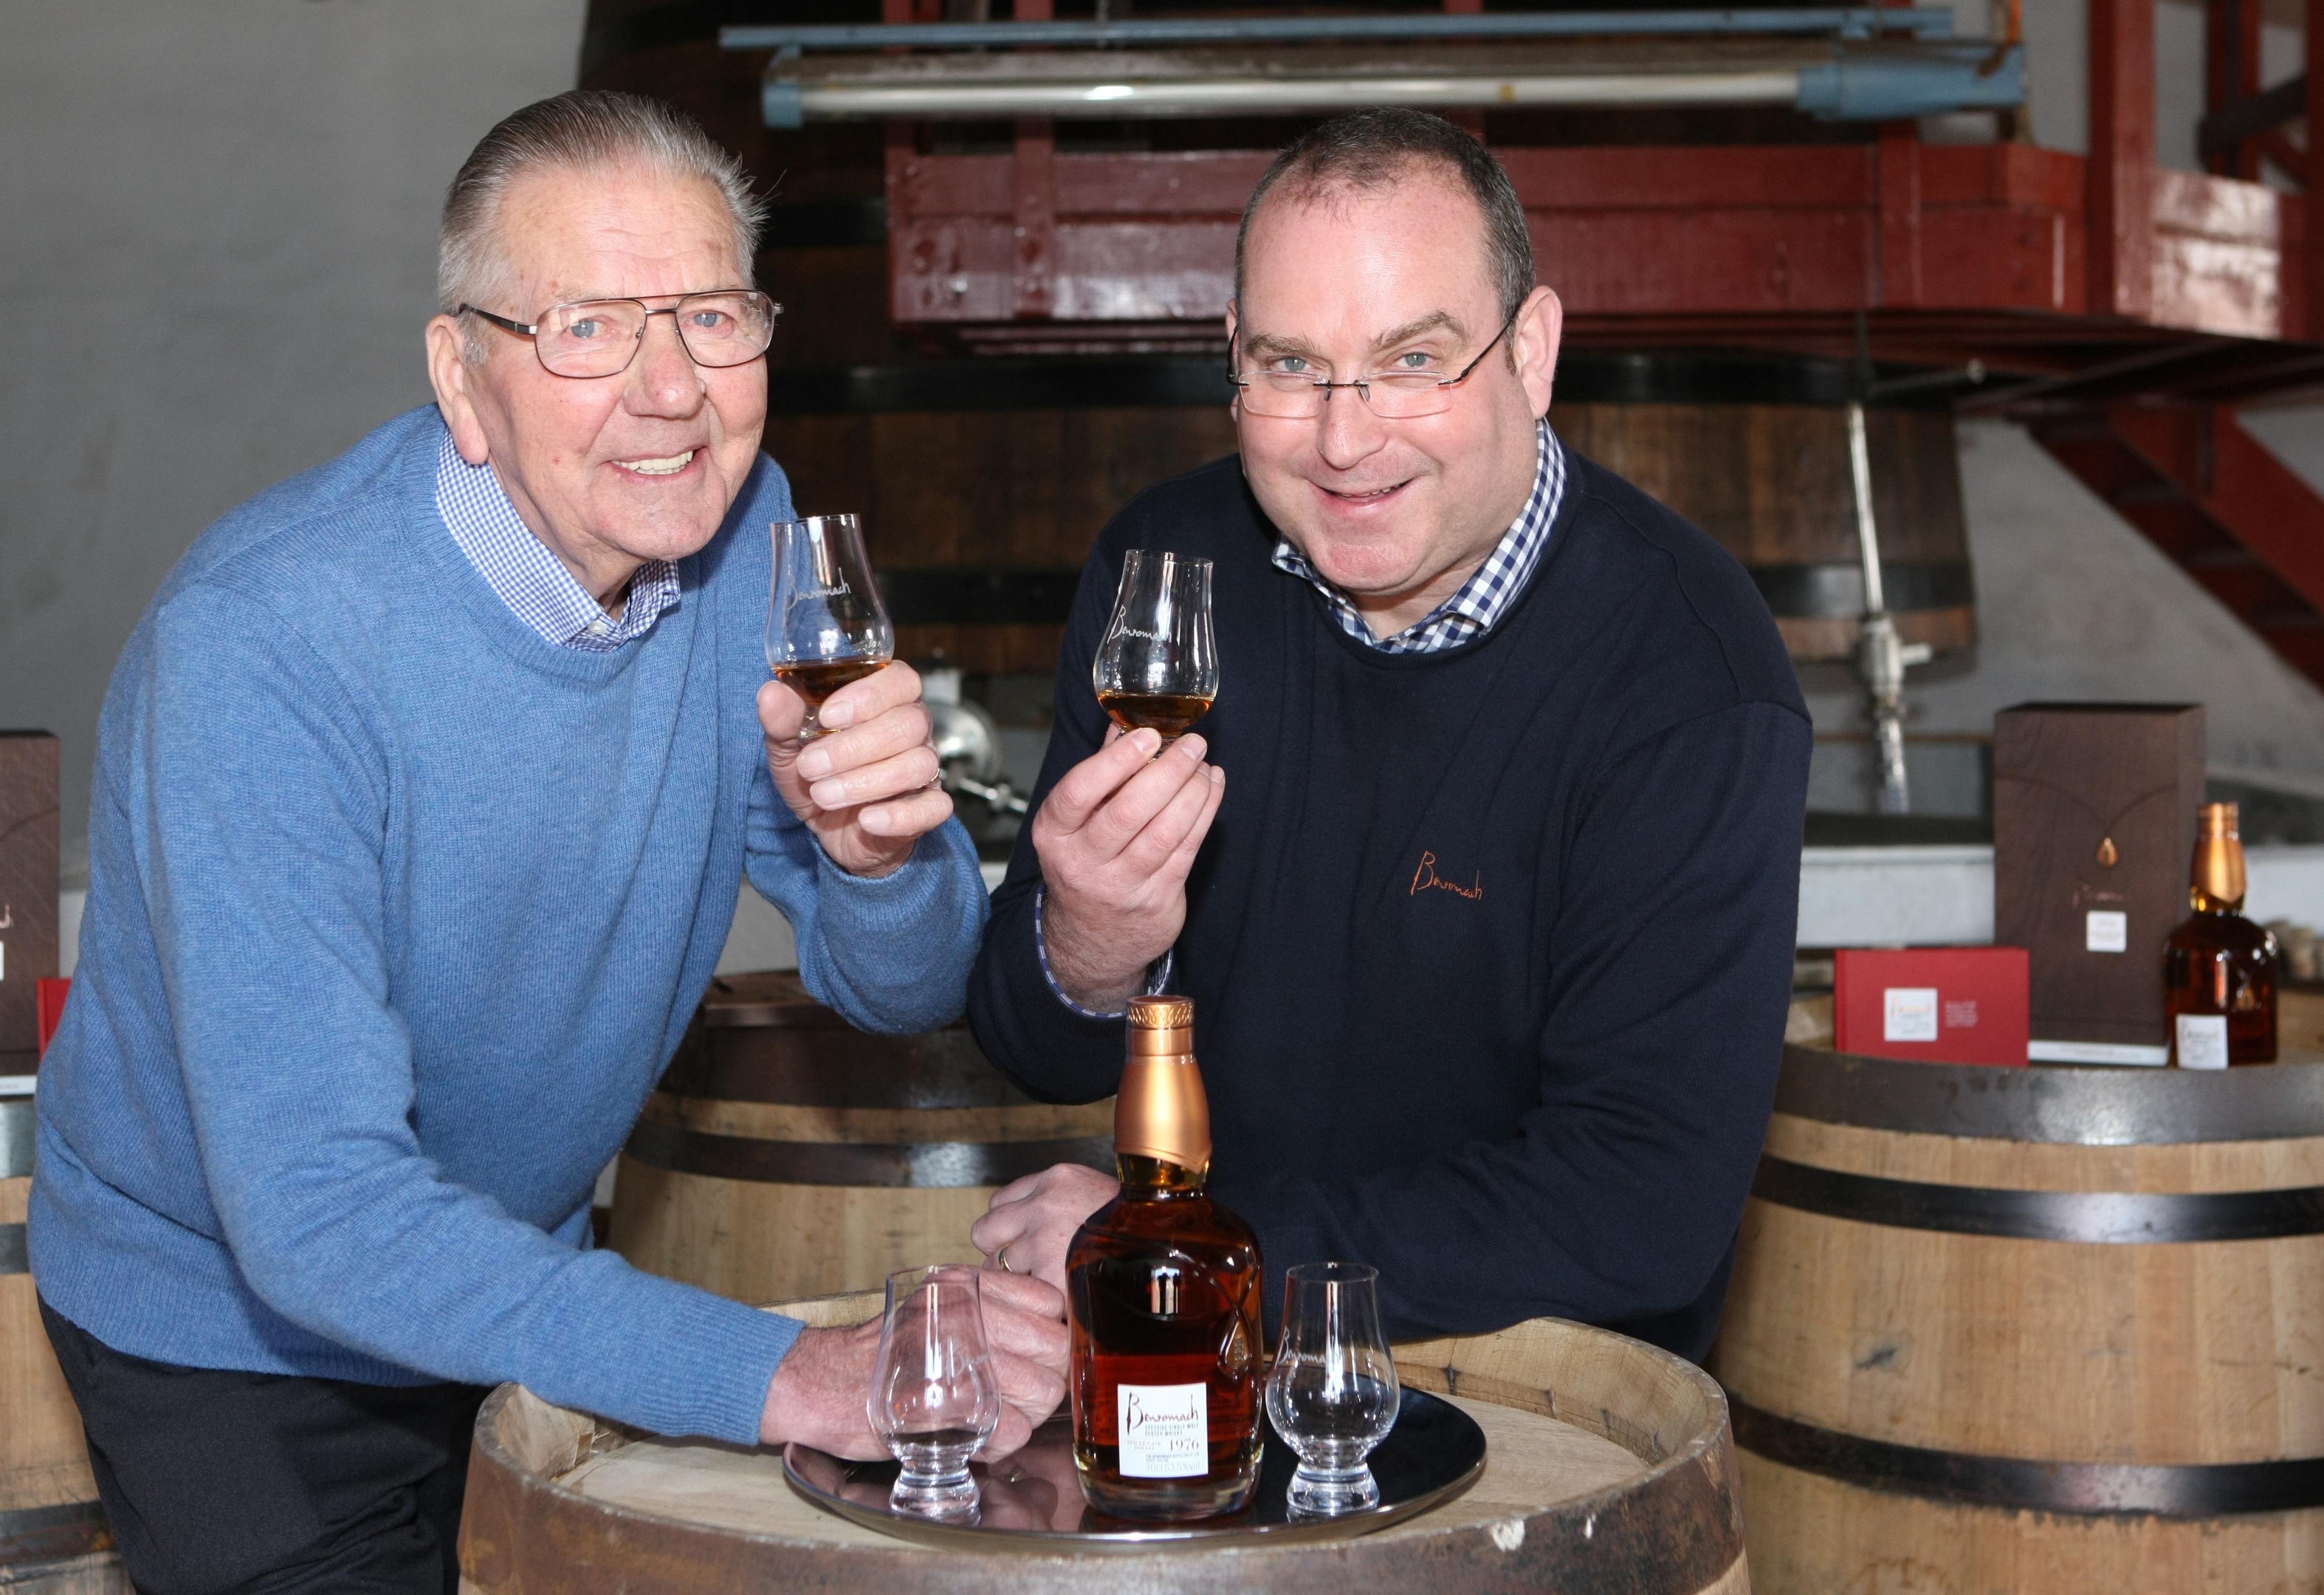 Benromach Distillery manager Keith Cruickshank, right, with retired distiller Tom Anderson.